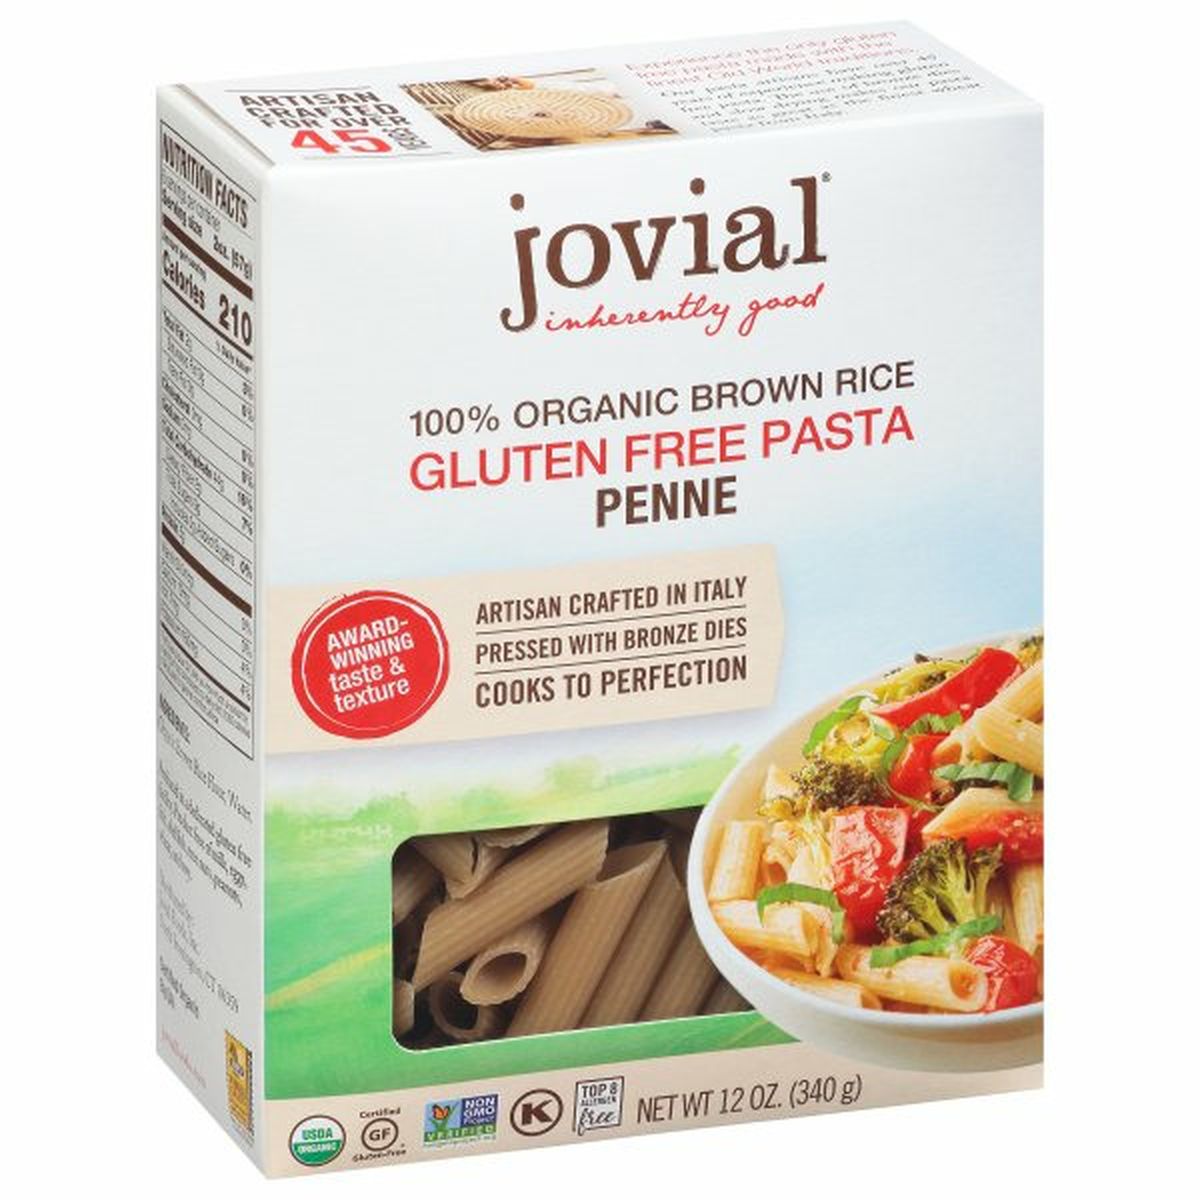 Calories in Jovial Pasta, Gluten Free, Penne